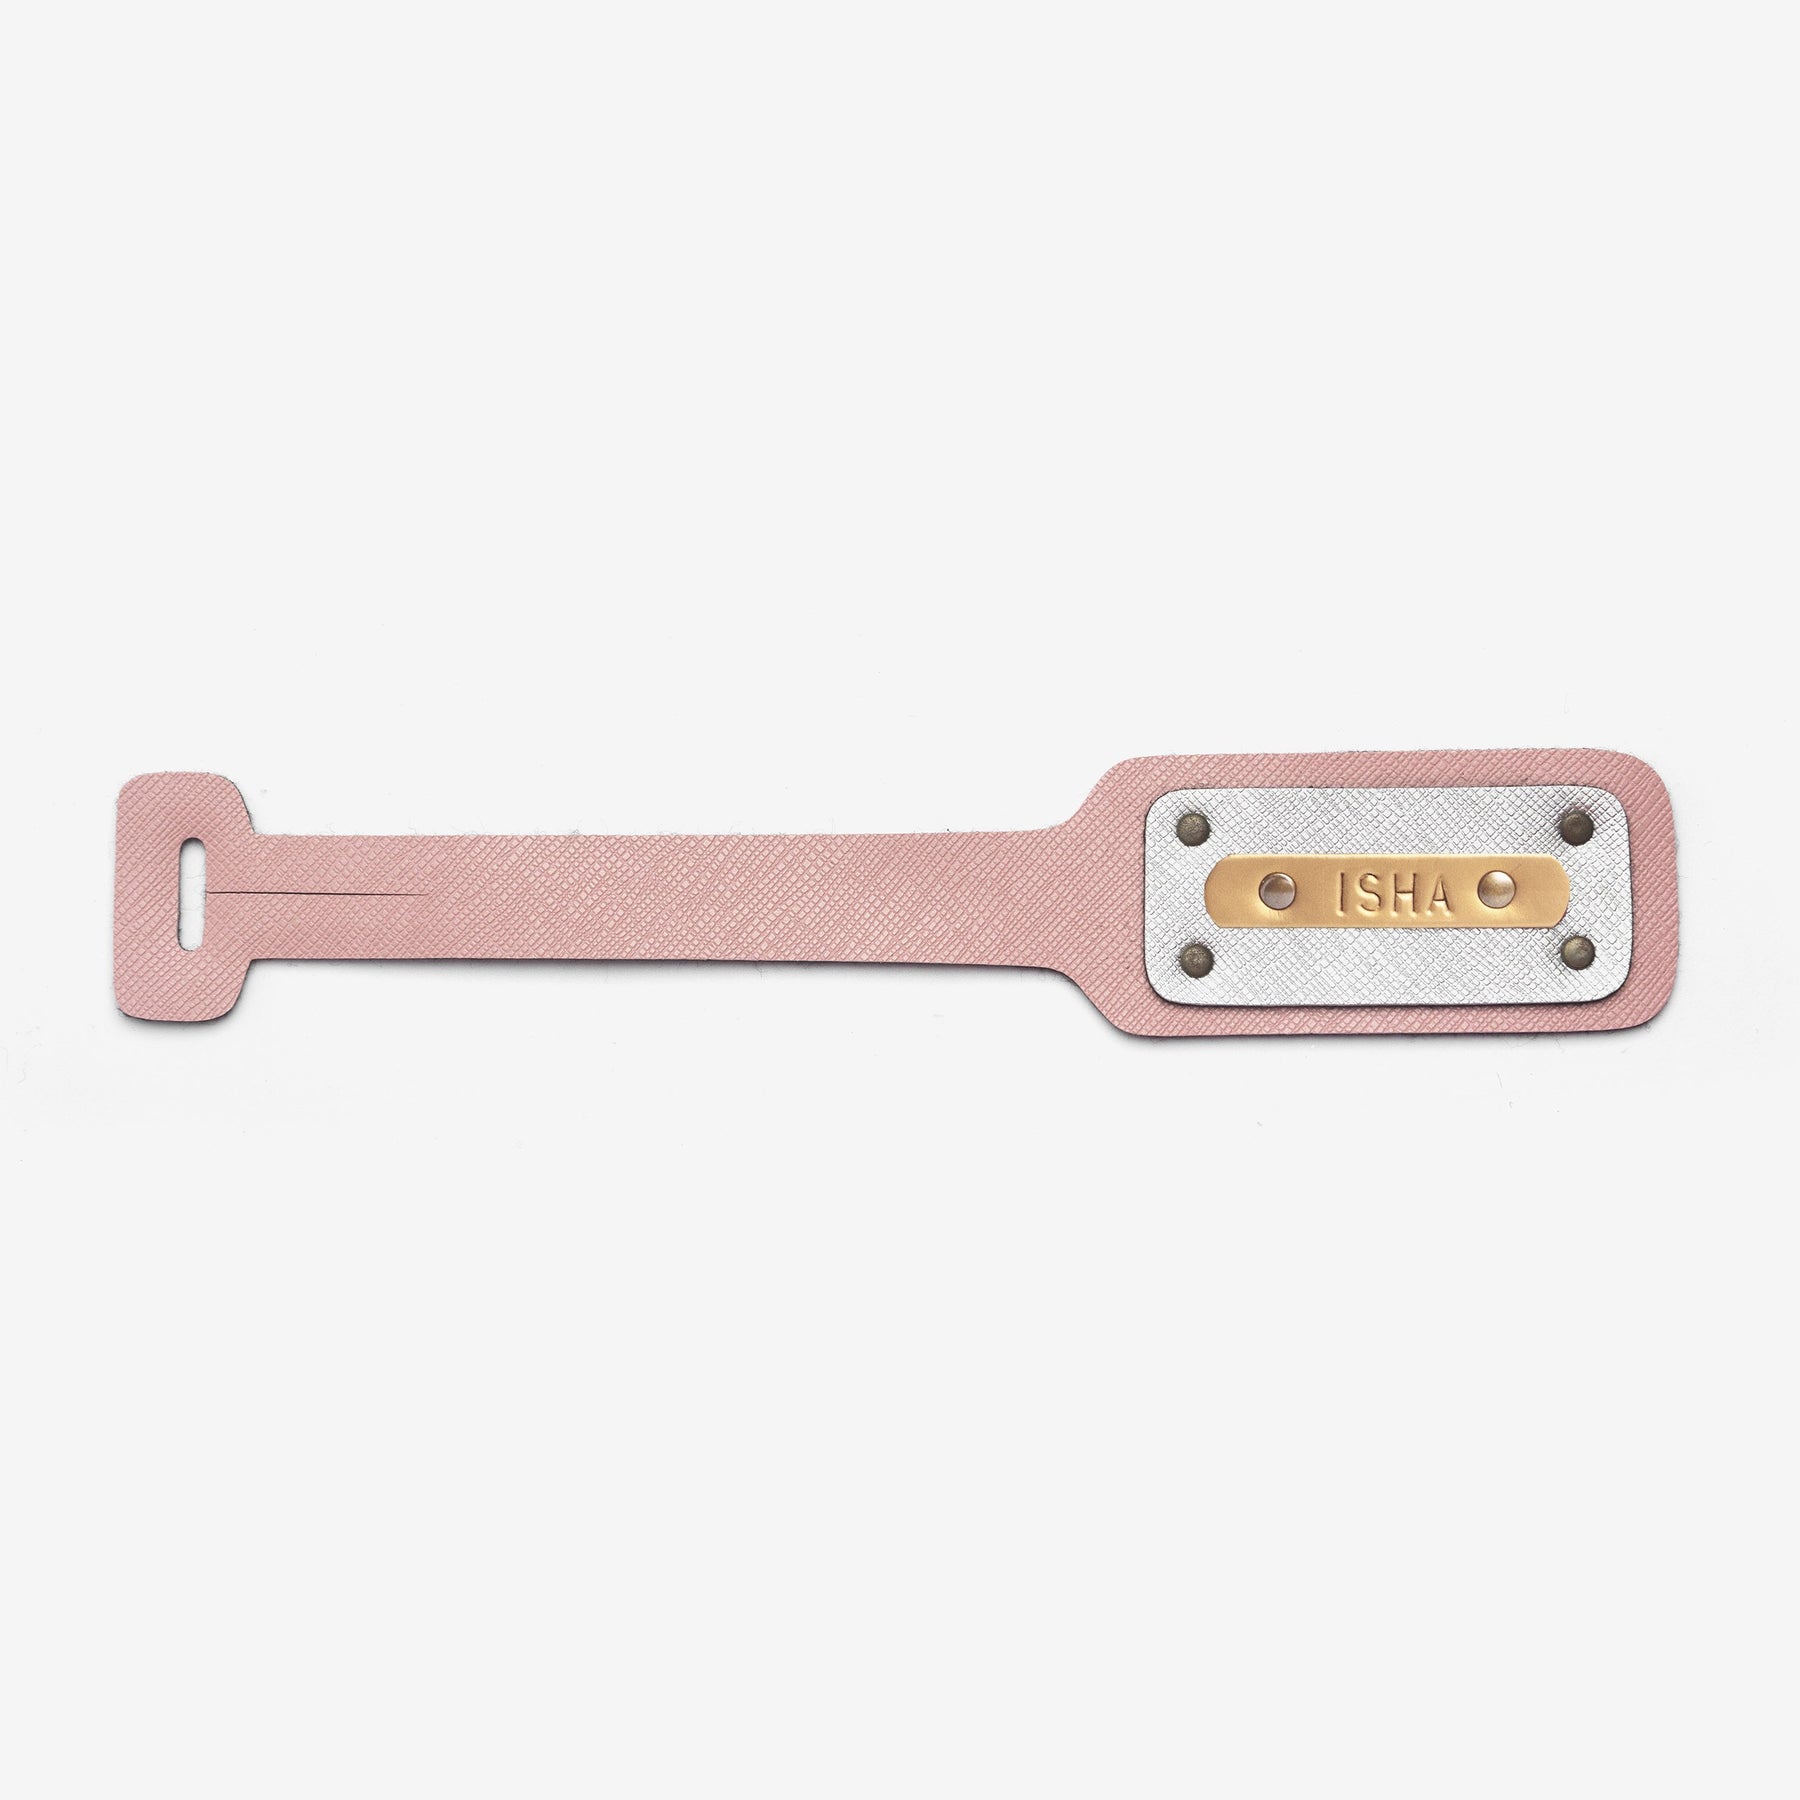 Personalised Leather Luggage/Baggage Tag - Salmon Pink and Silver